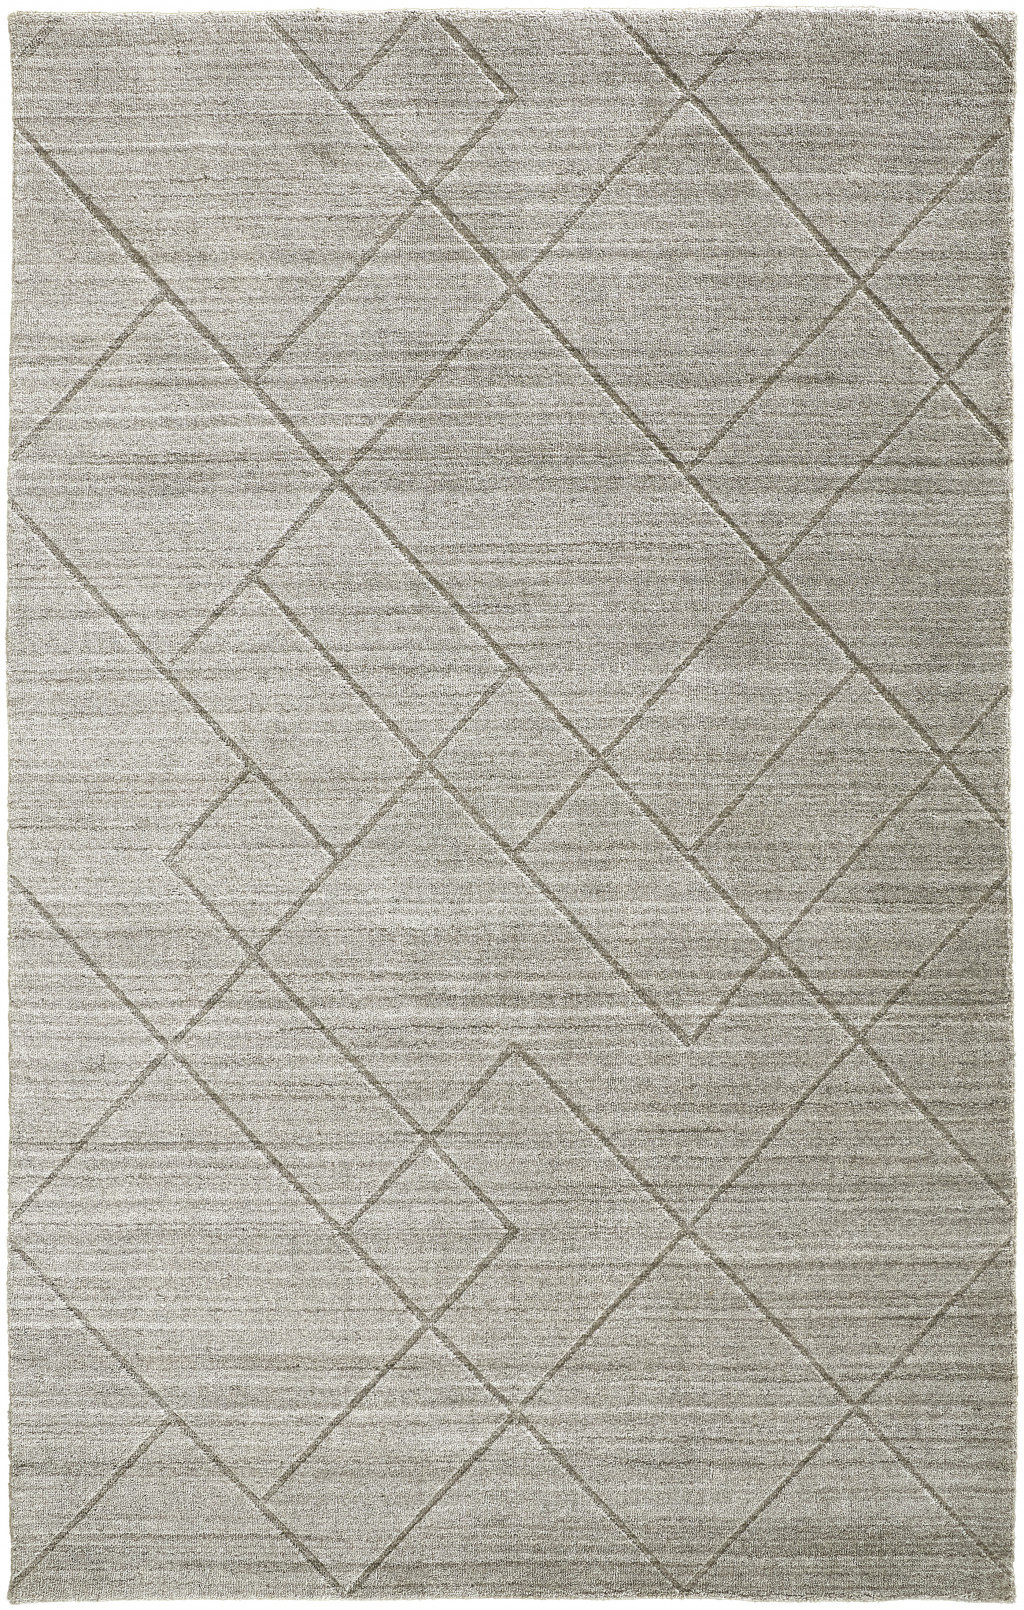 5' X 8' Ivory And Silver Striped Hand Woven Area Rug-514785-1